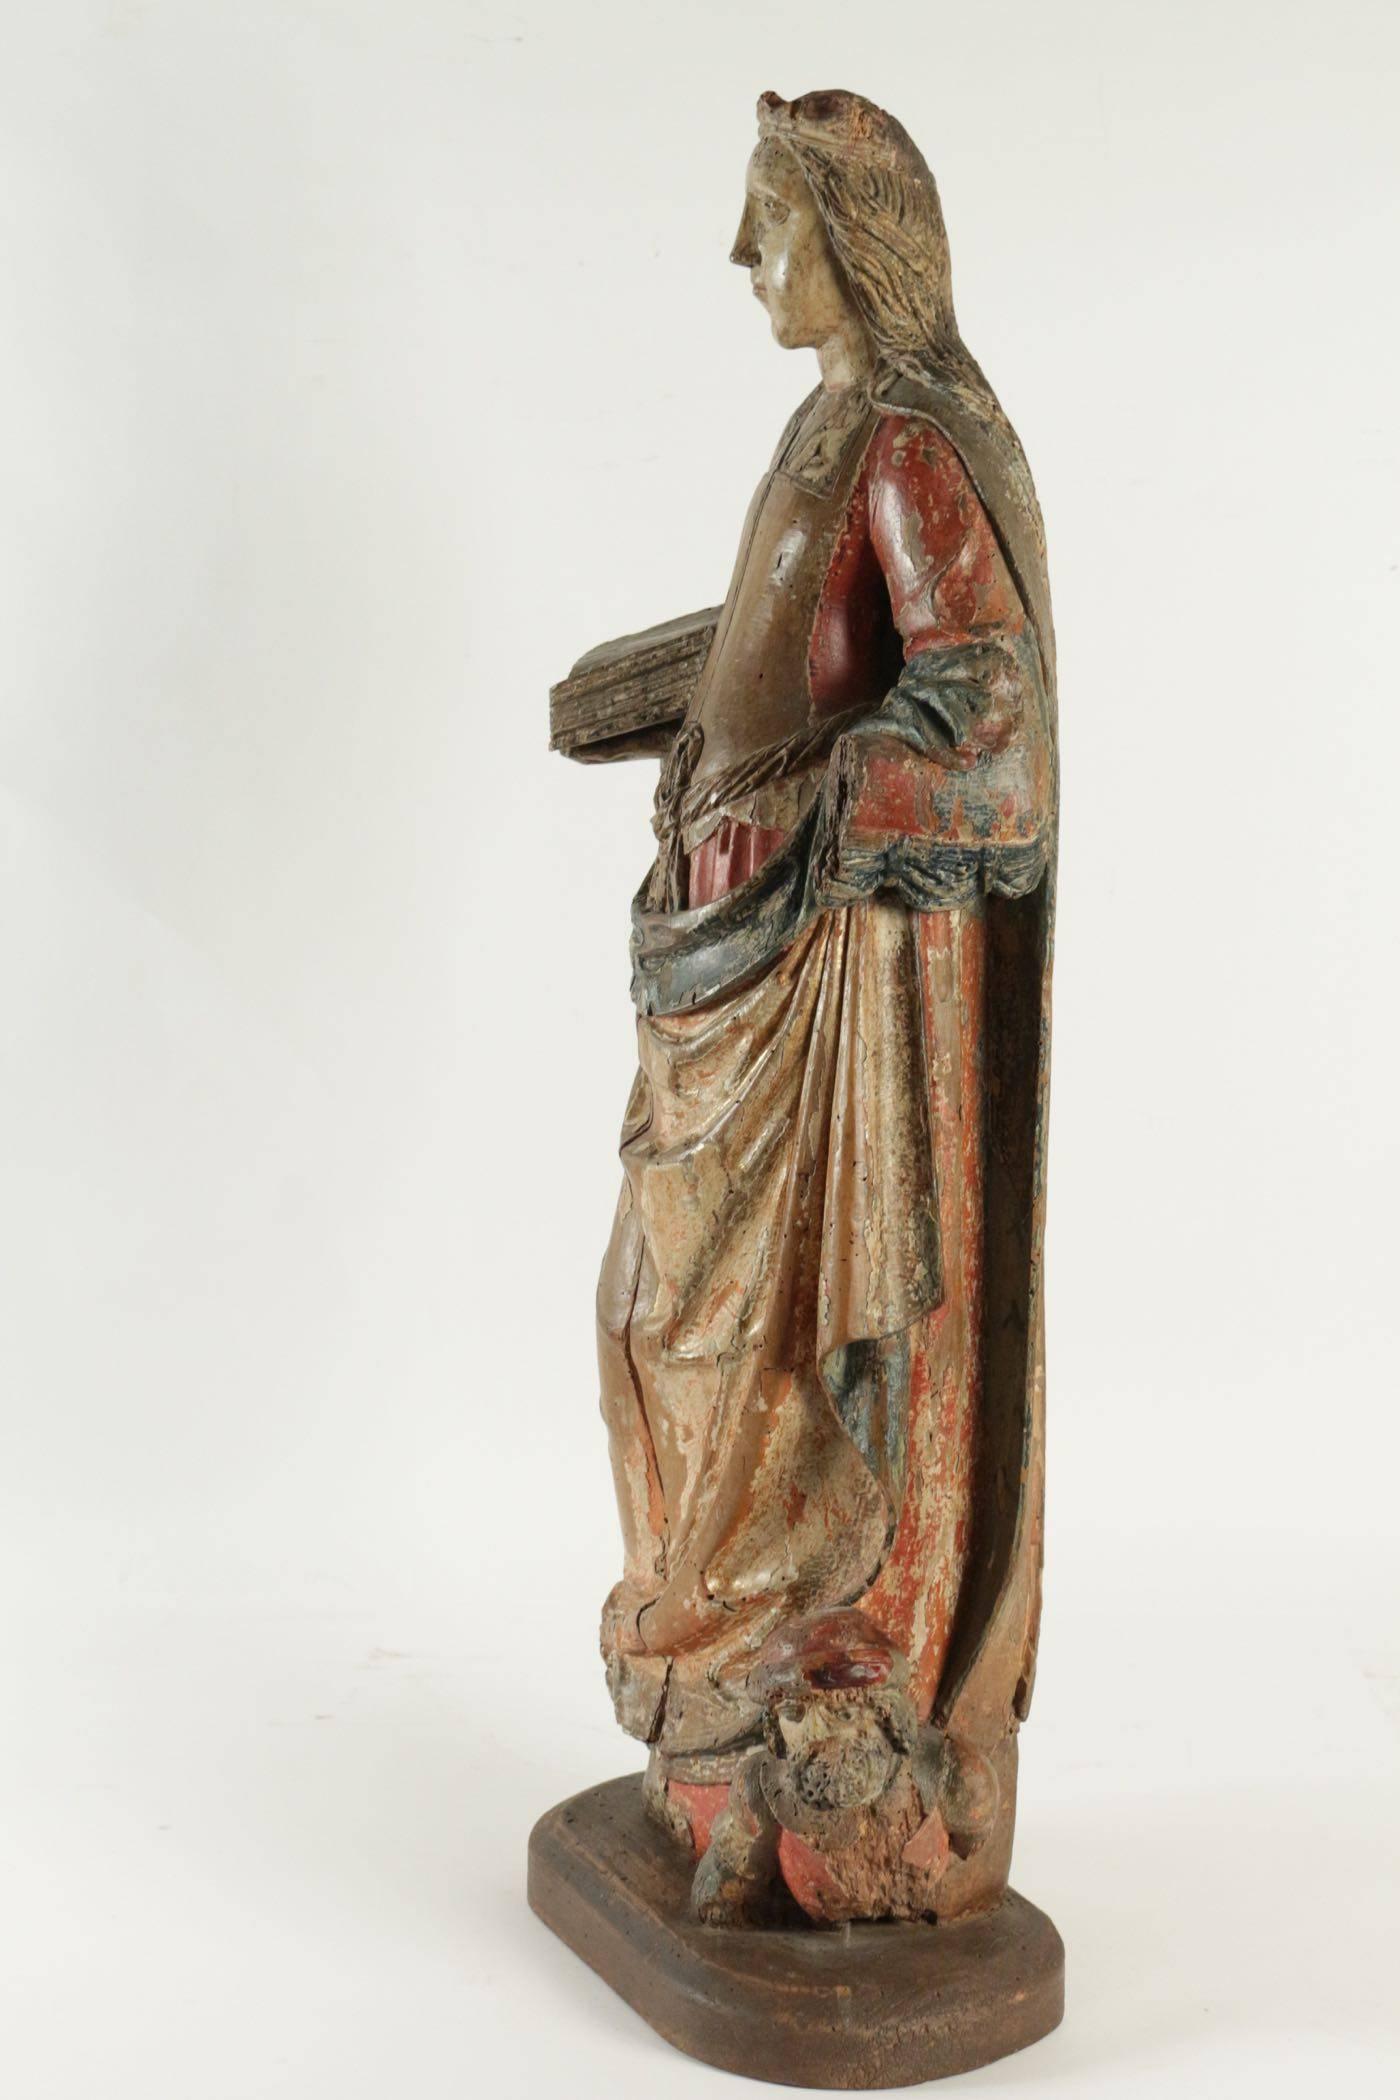 Polychromed Wooden Sculpture of Saint Catherine in Walnut